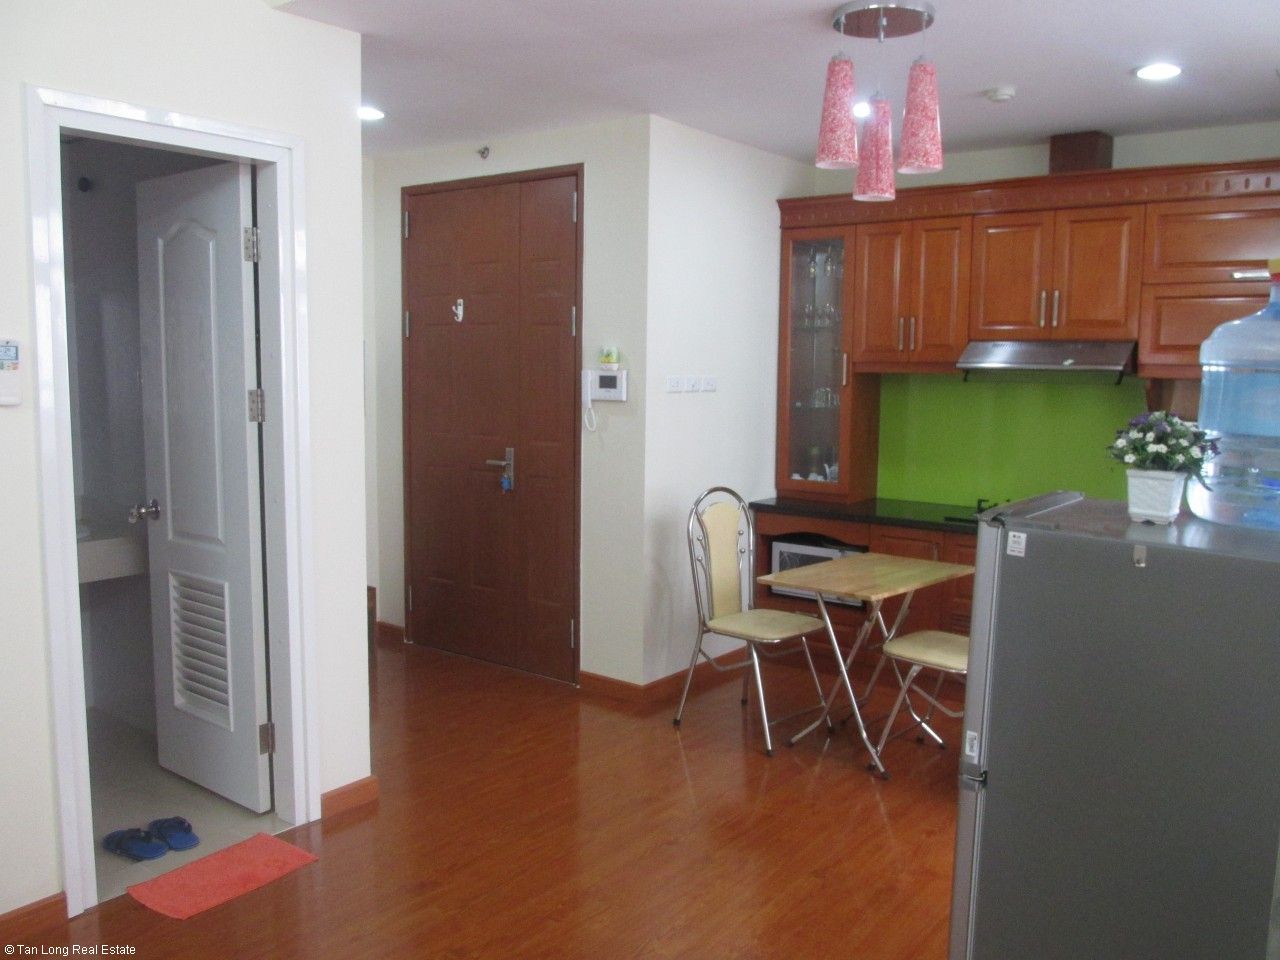 Apartment for rent in Nam Cuong urban area at CT13D Bac Tu Liem district, Hanoi city 10